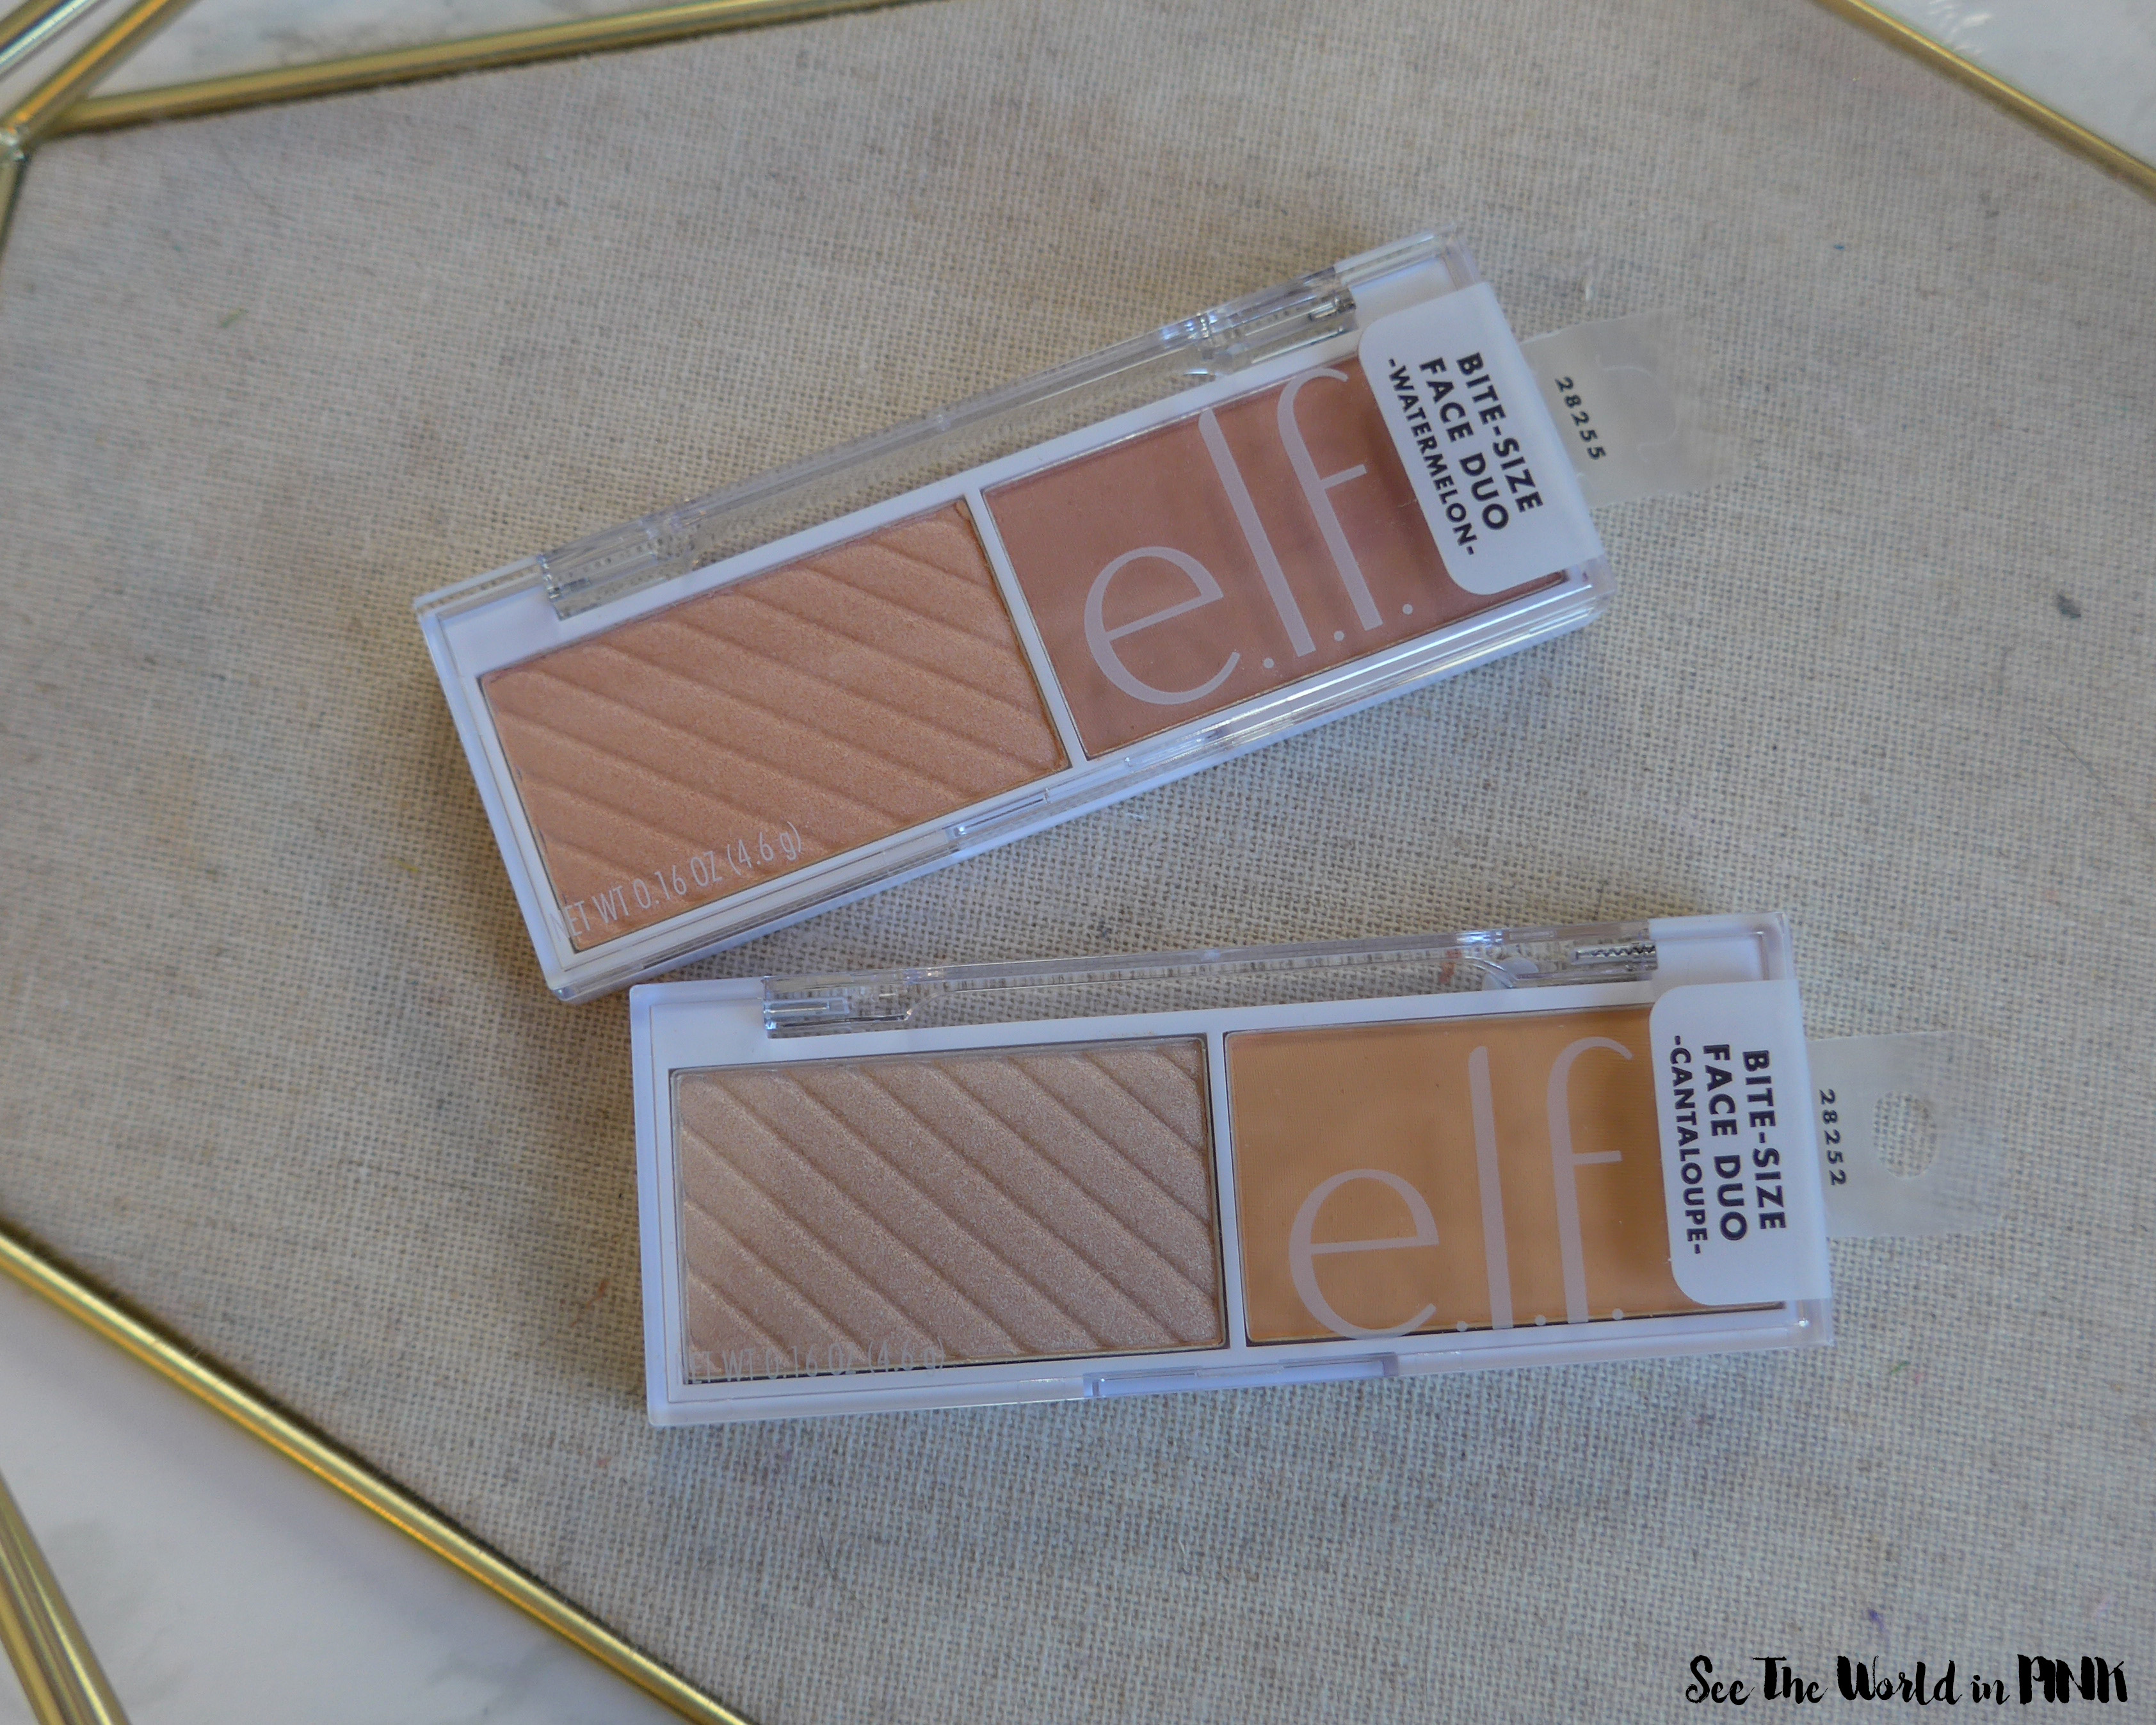 ELF Cosmetics - Huge Swatch & Thoughts Post ~ Primer Infused Bronzer, Hydrating Camo Concealer, Bite Size Duos, Monochromatic Multi-sticks and More!